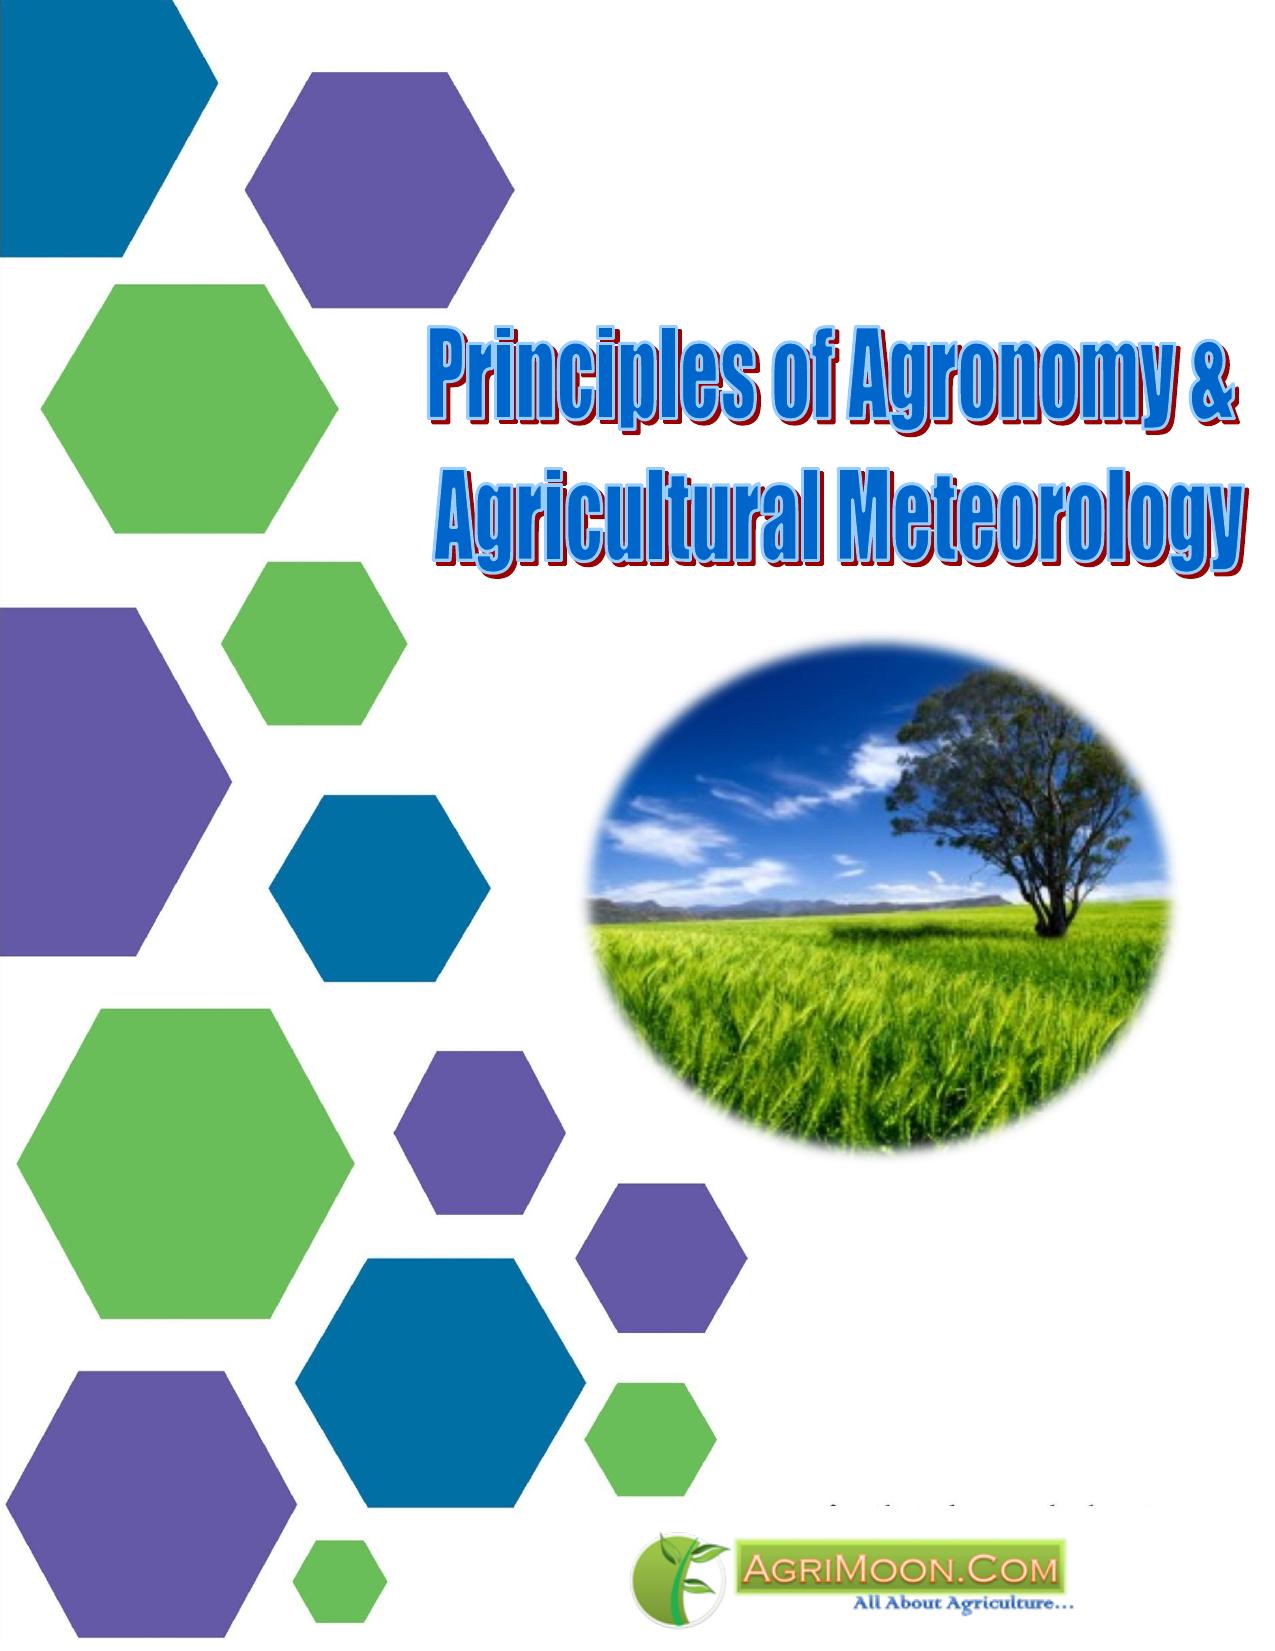 Principles-of-Agronomy-Agricultural-Meteorology